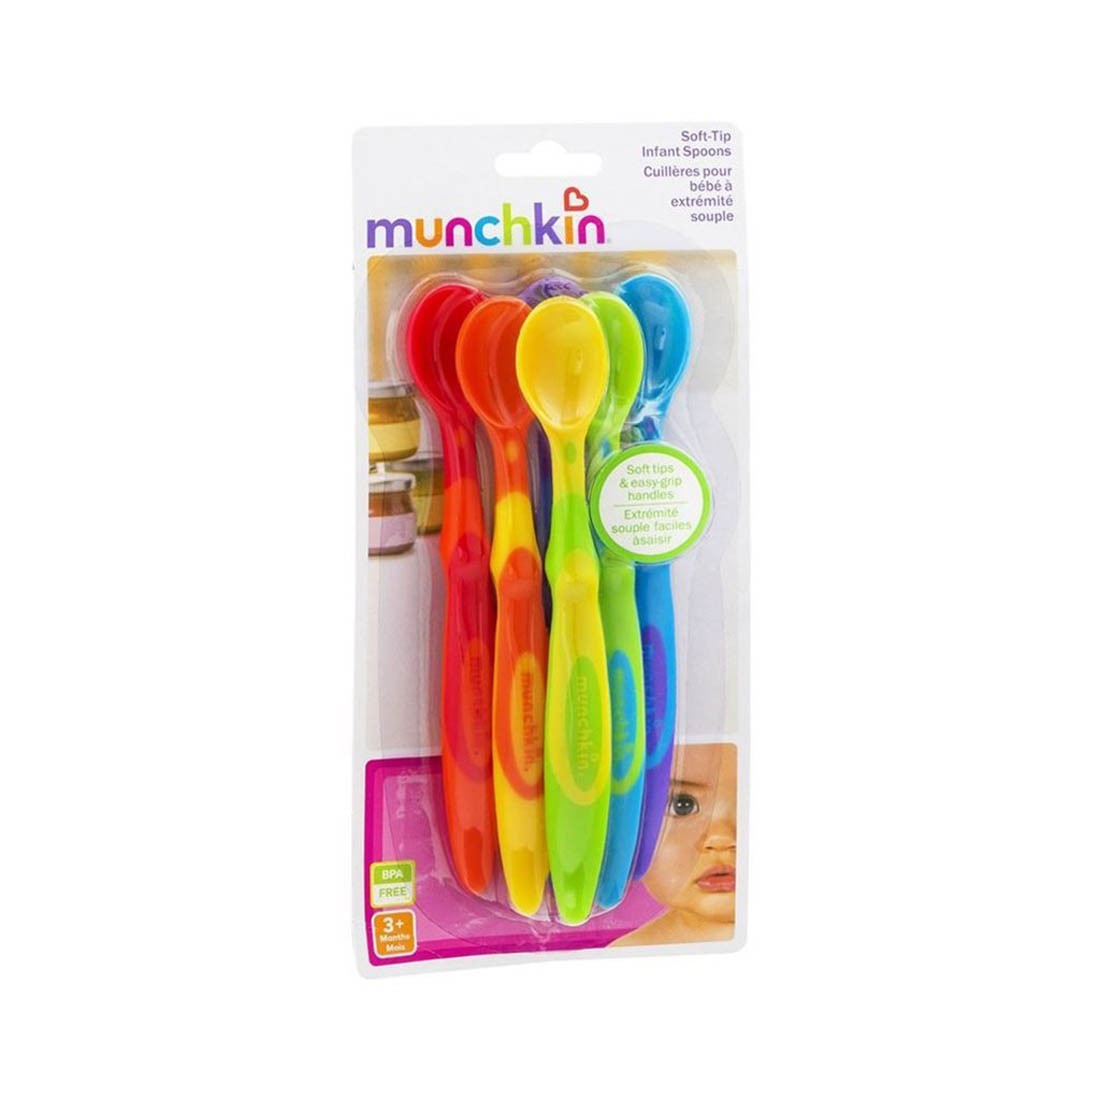 Munchkin 5 Pack Bowl and 6 Pack Spoon Set for baby/toddler